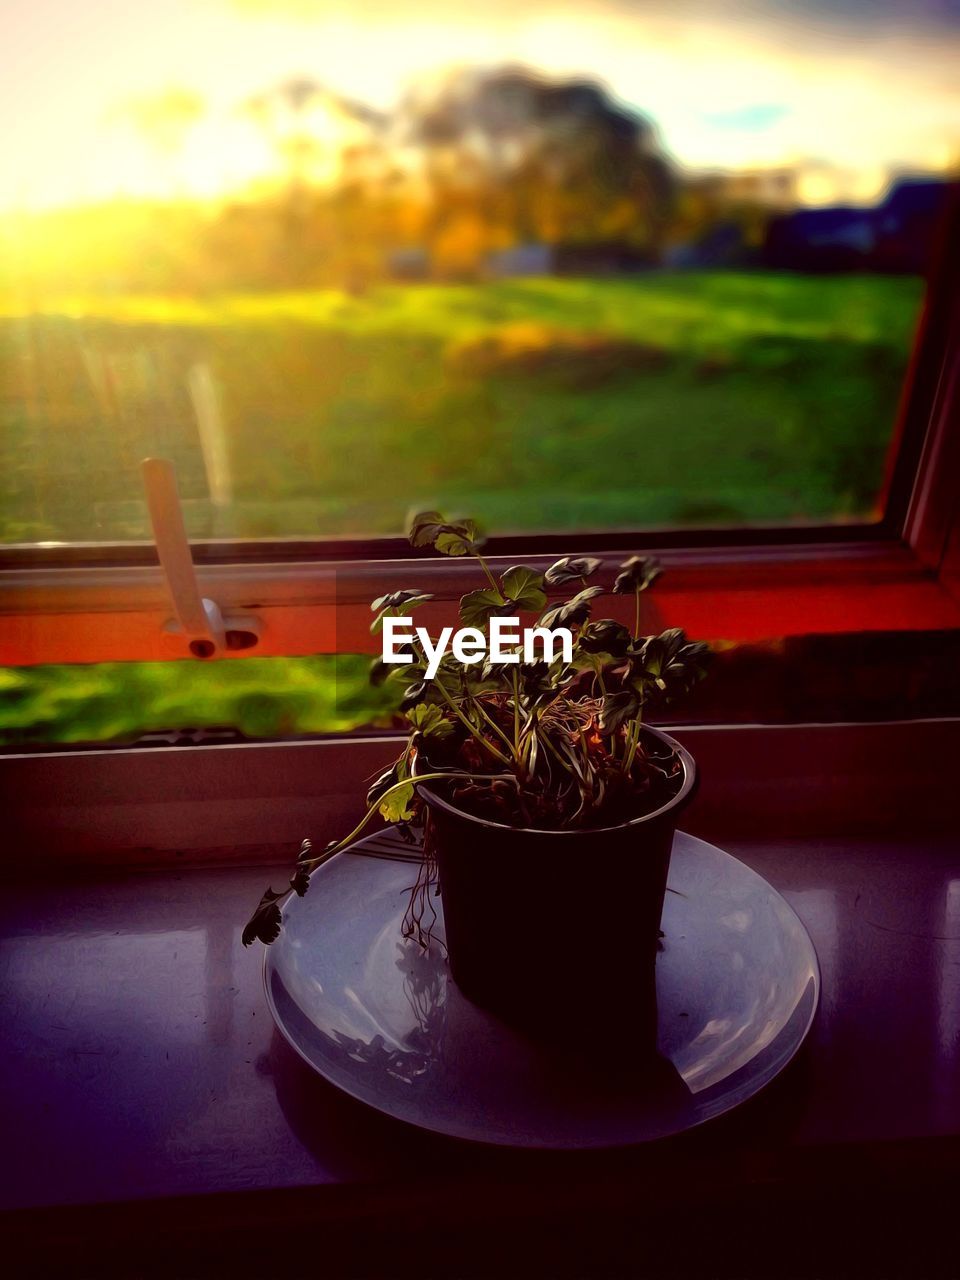 CLOSE-UP OF POTTED PLANT ON GLASS WINDOW